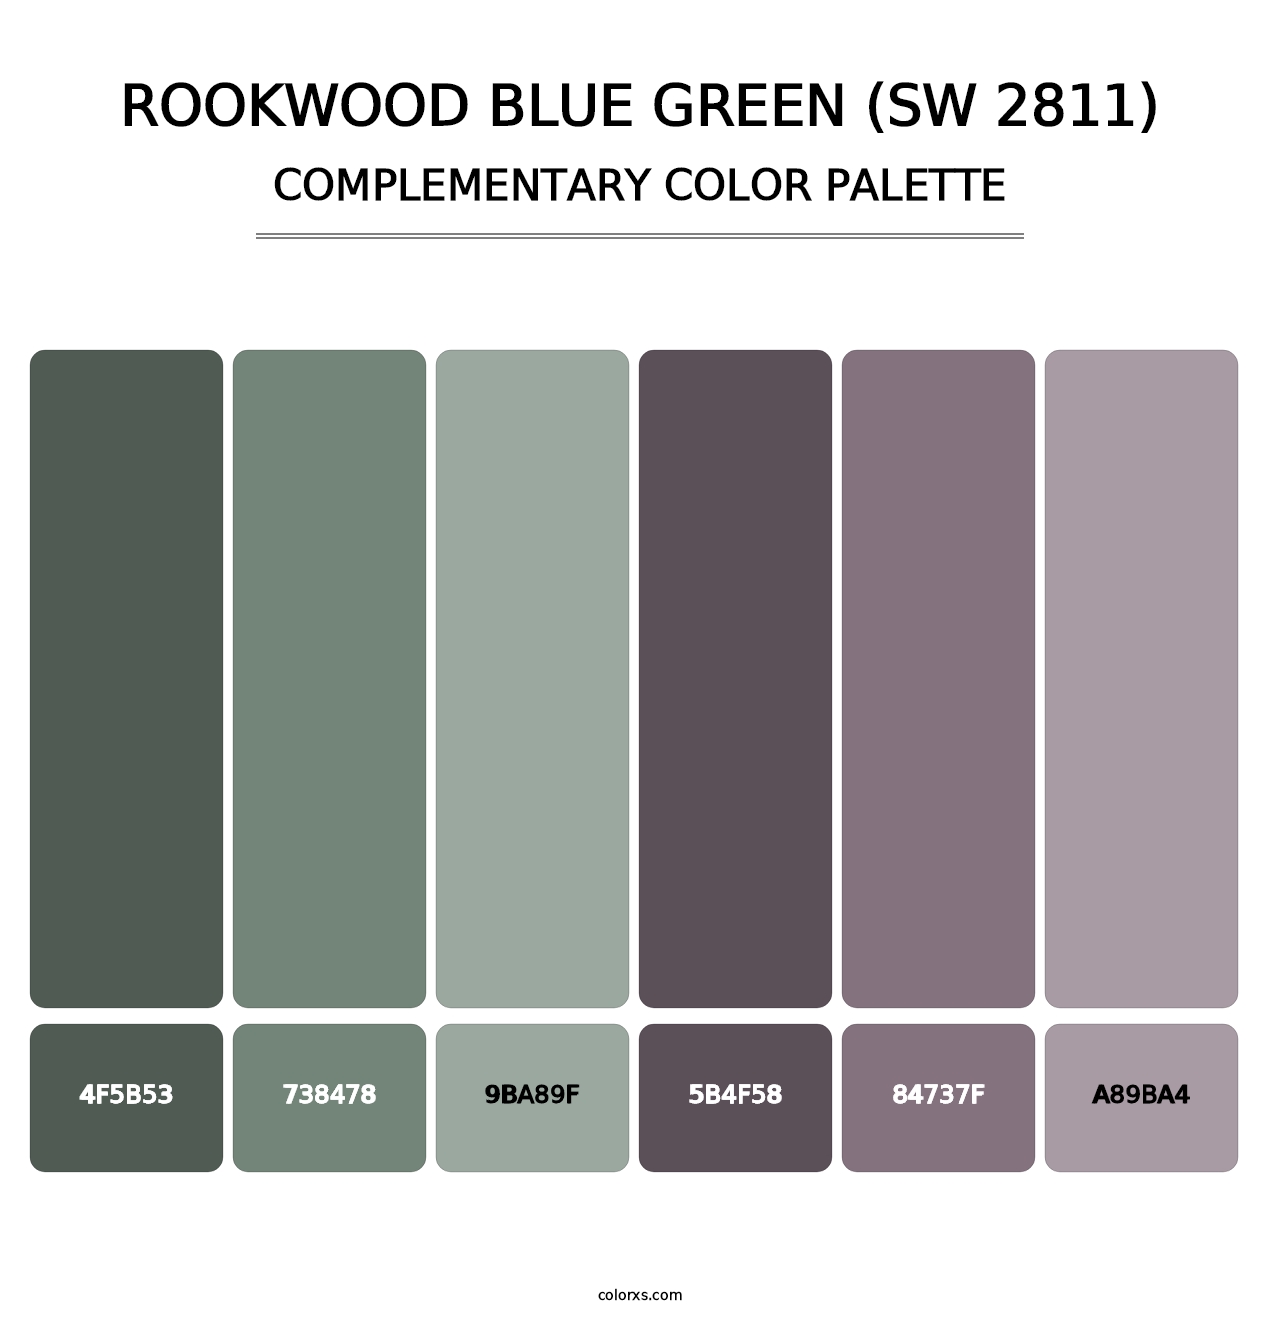 Rookwood Blue Green (SW 2811) - Complementary Color Palette